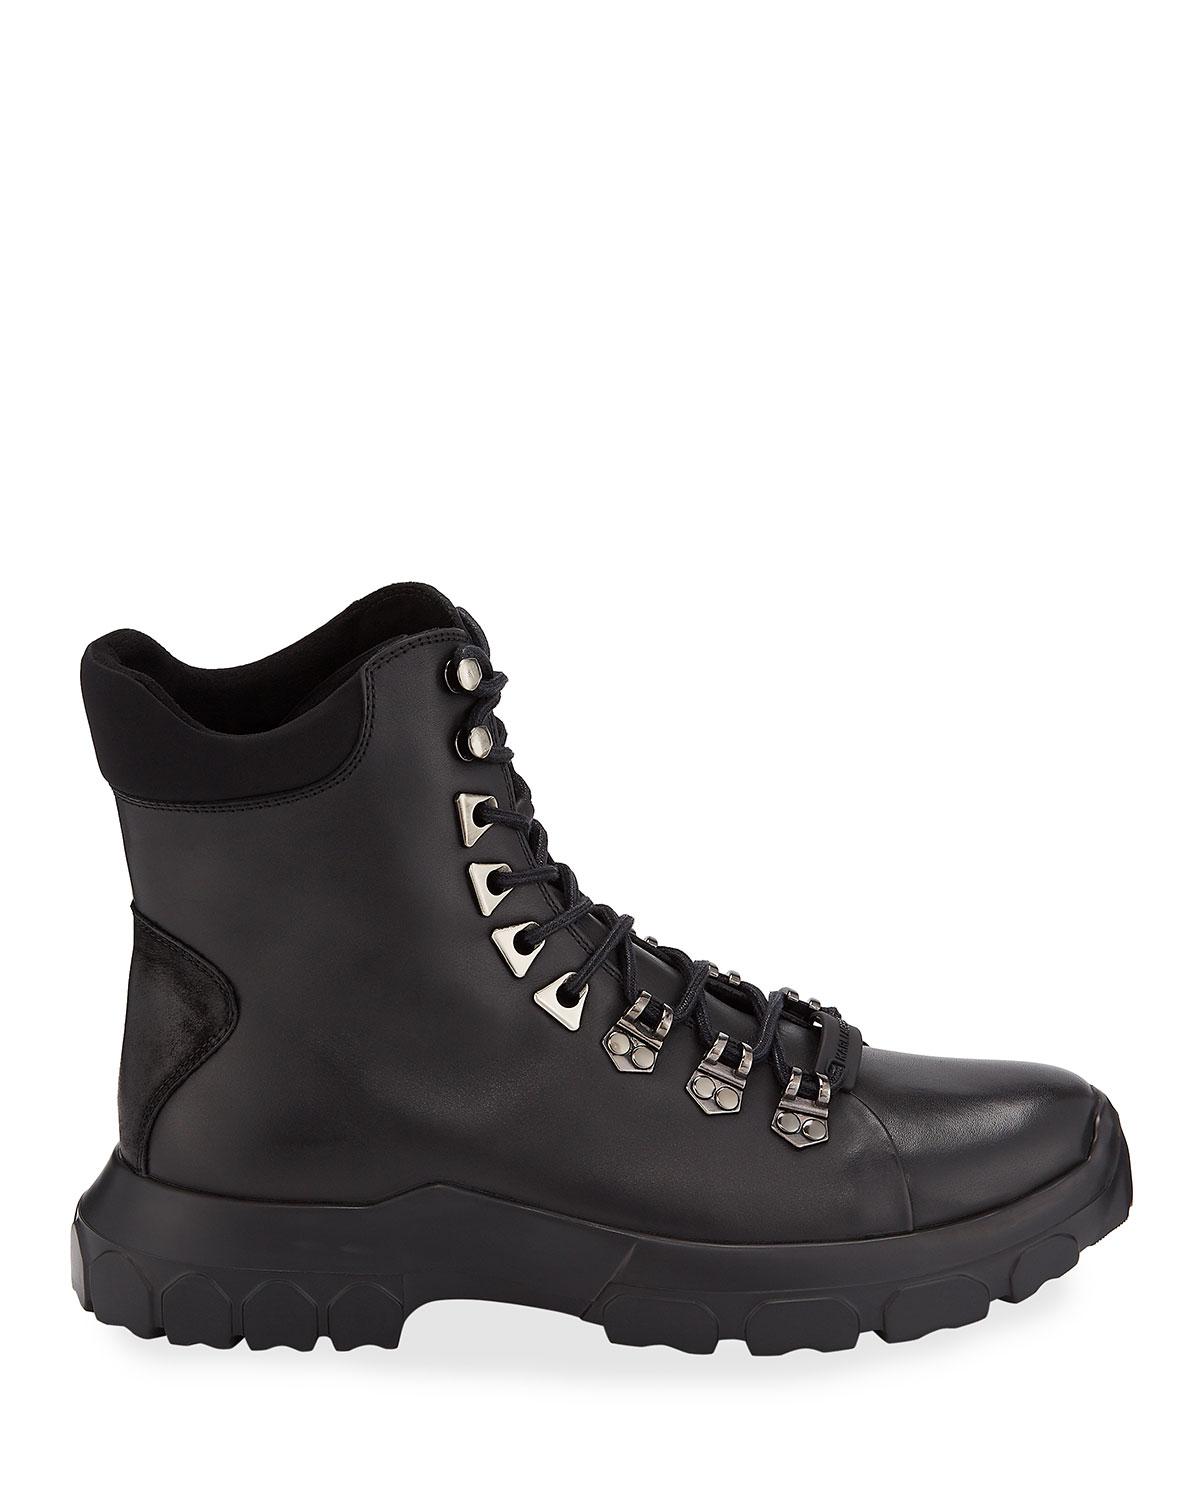 Karl Lagerfeld Leather Sawtooth Hiker Boot in Black for Men - Save 44% ...